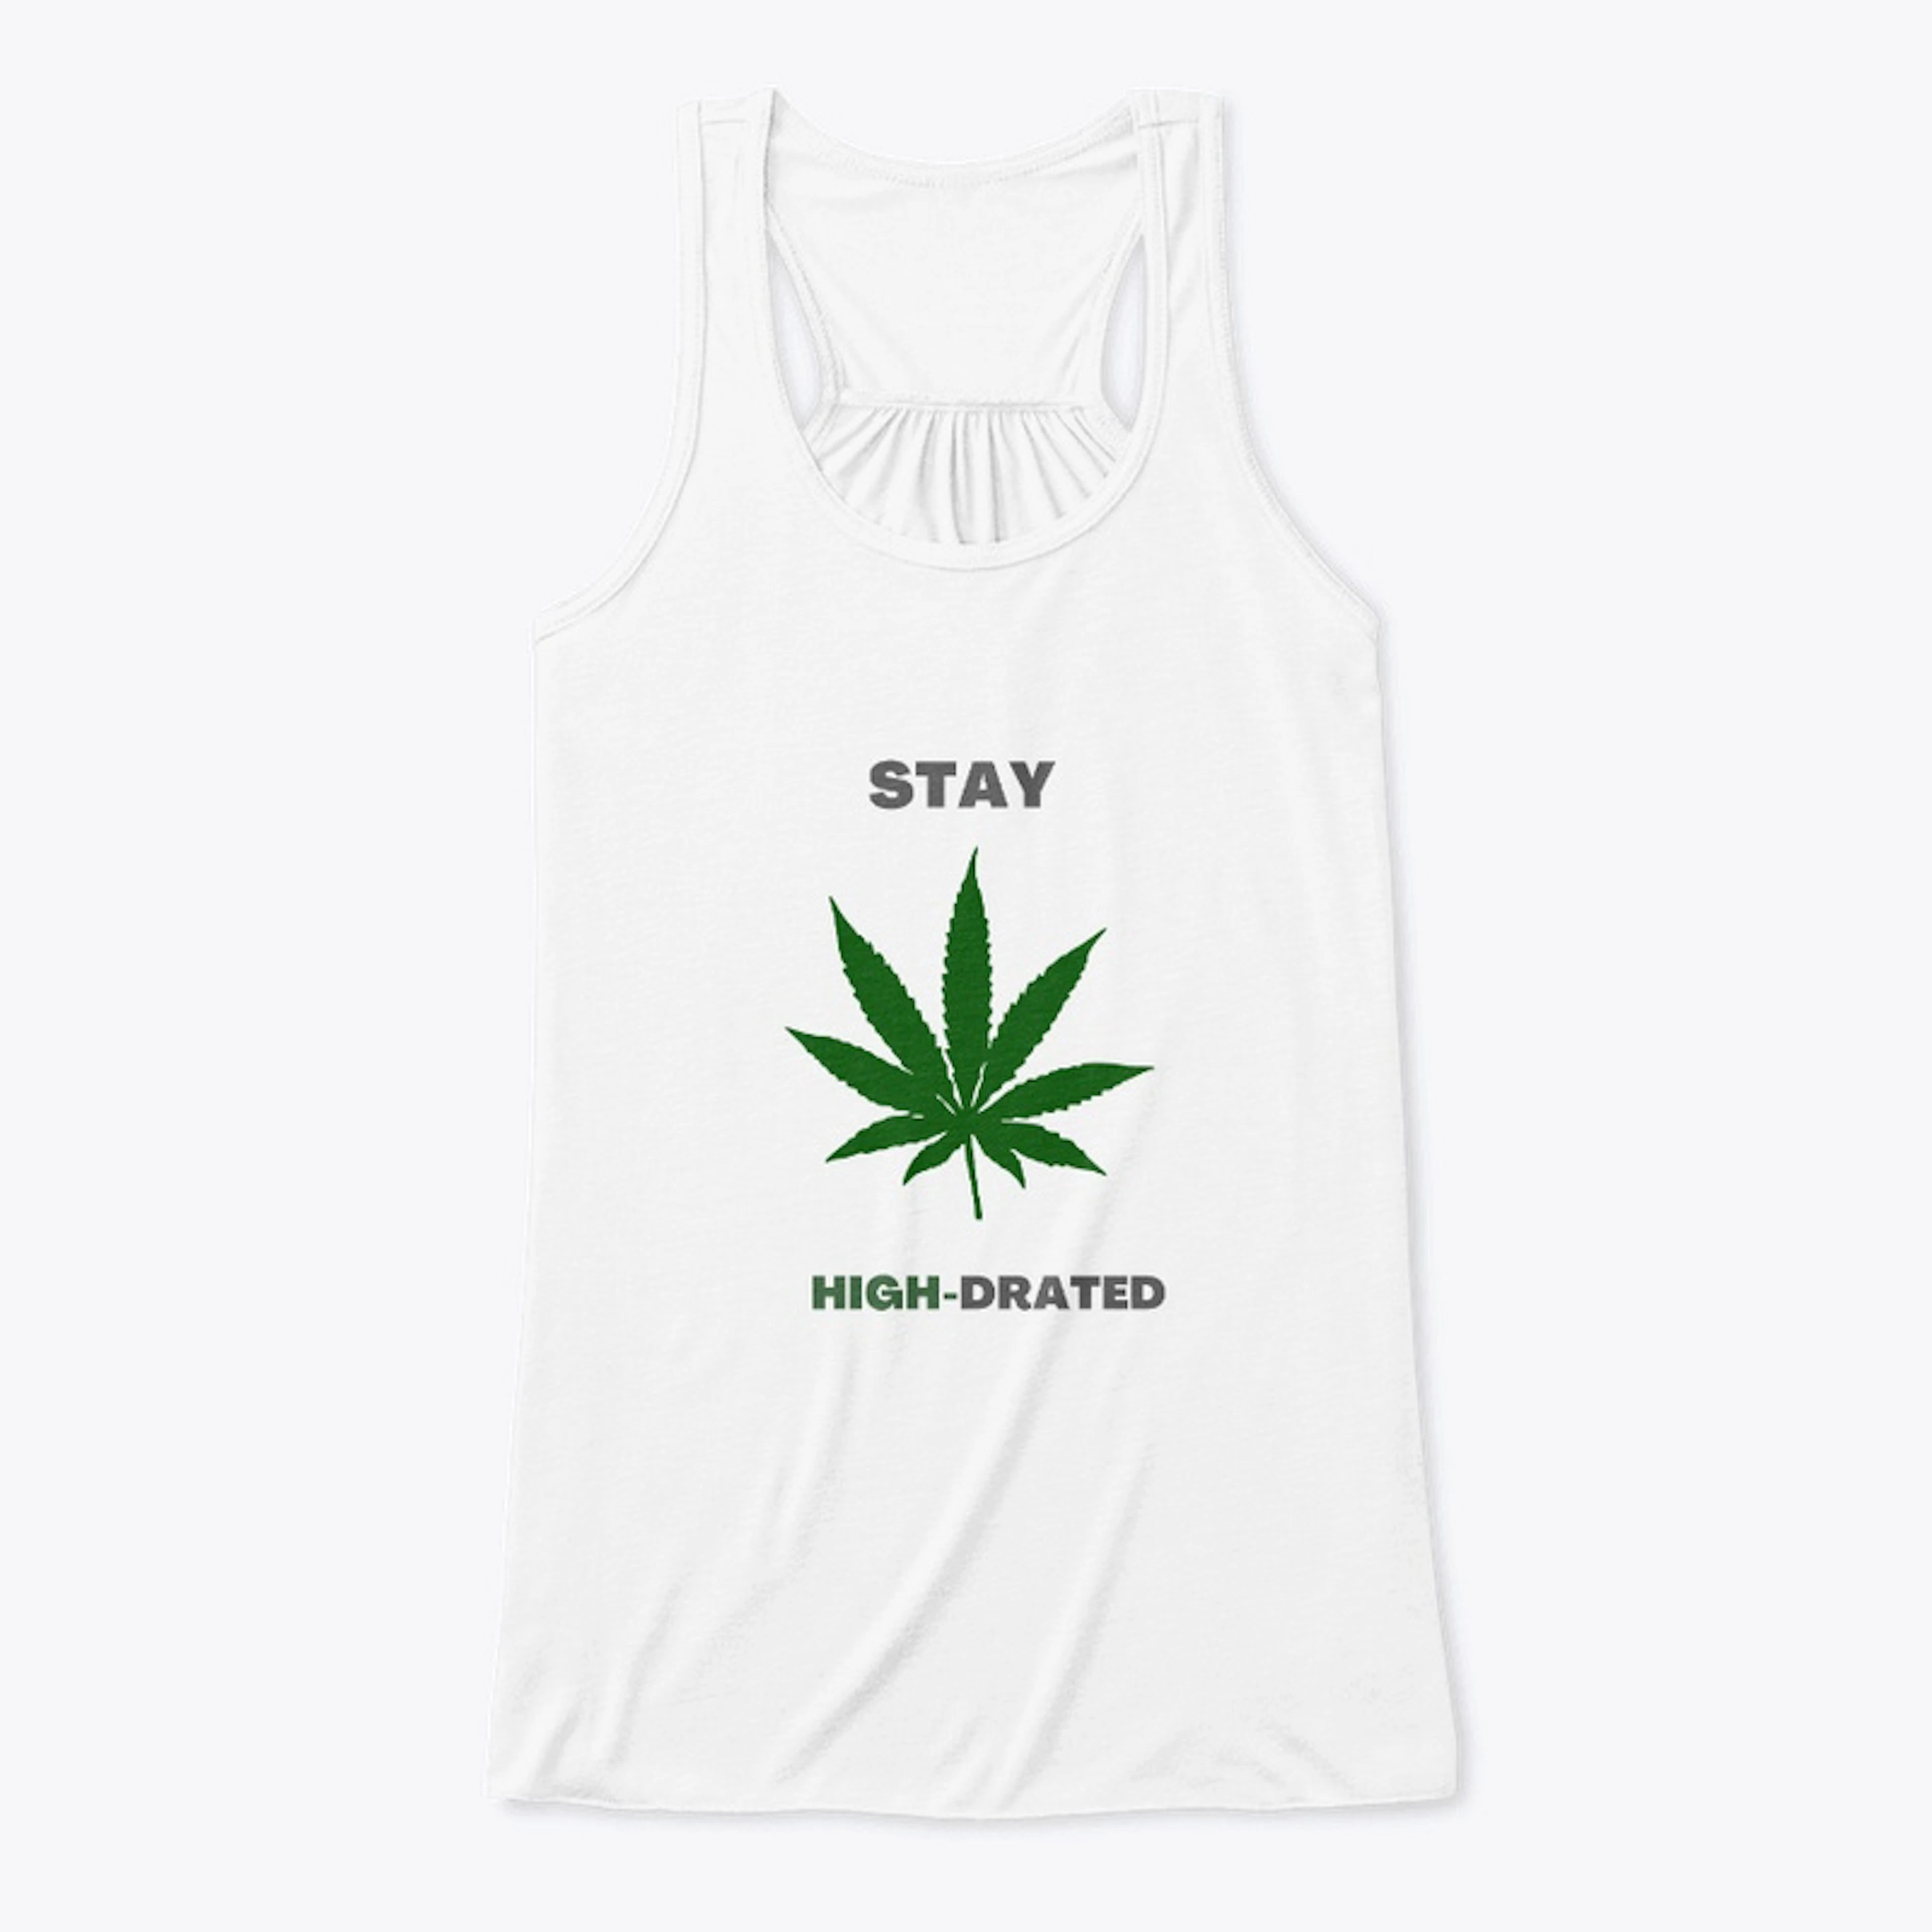 Stay High-drated